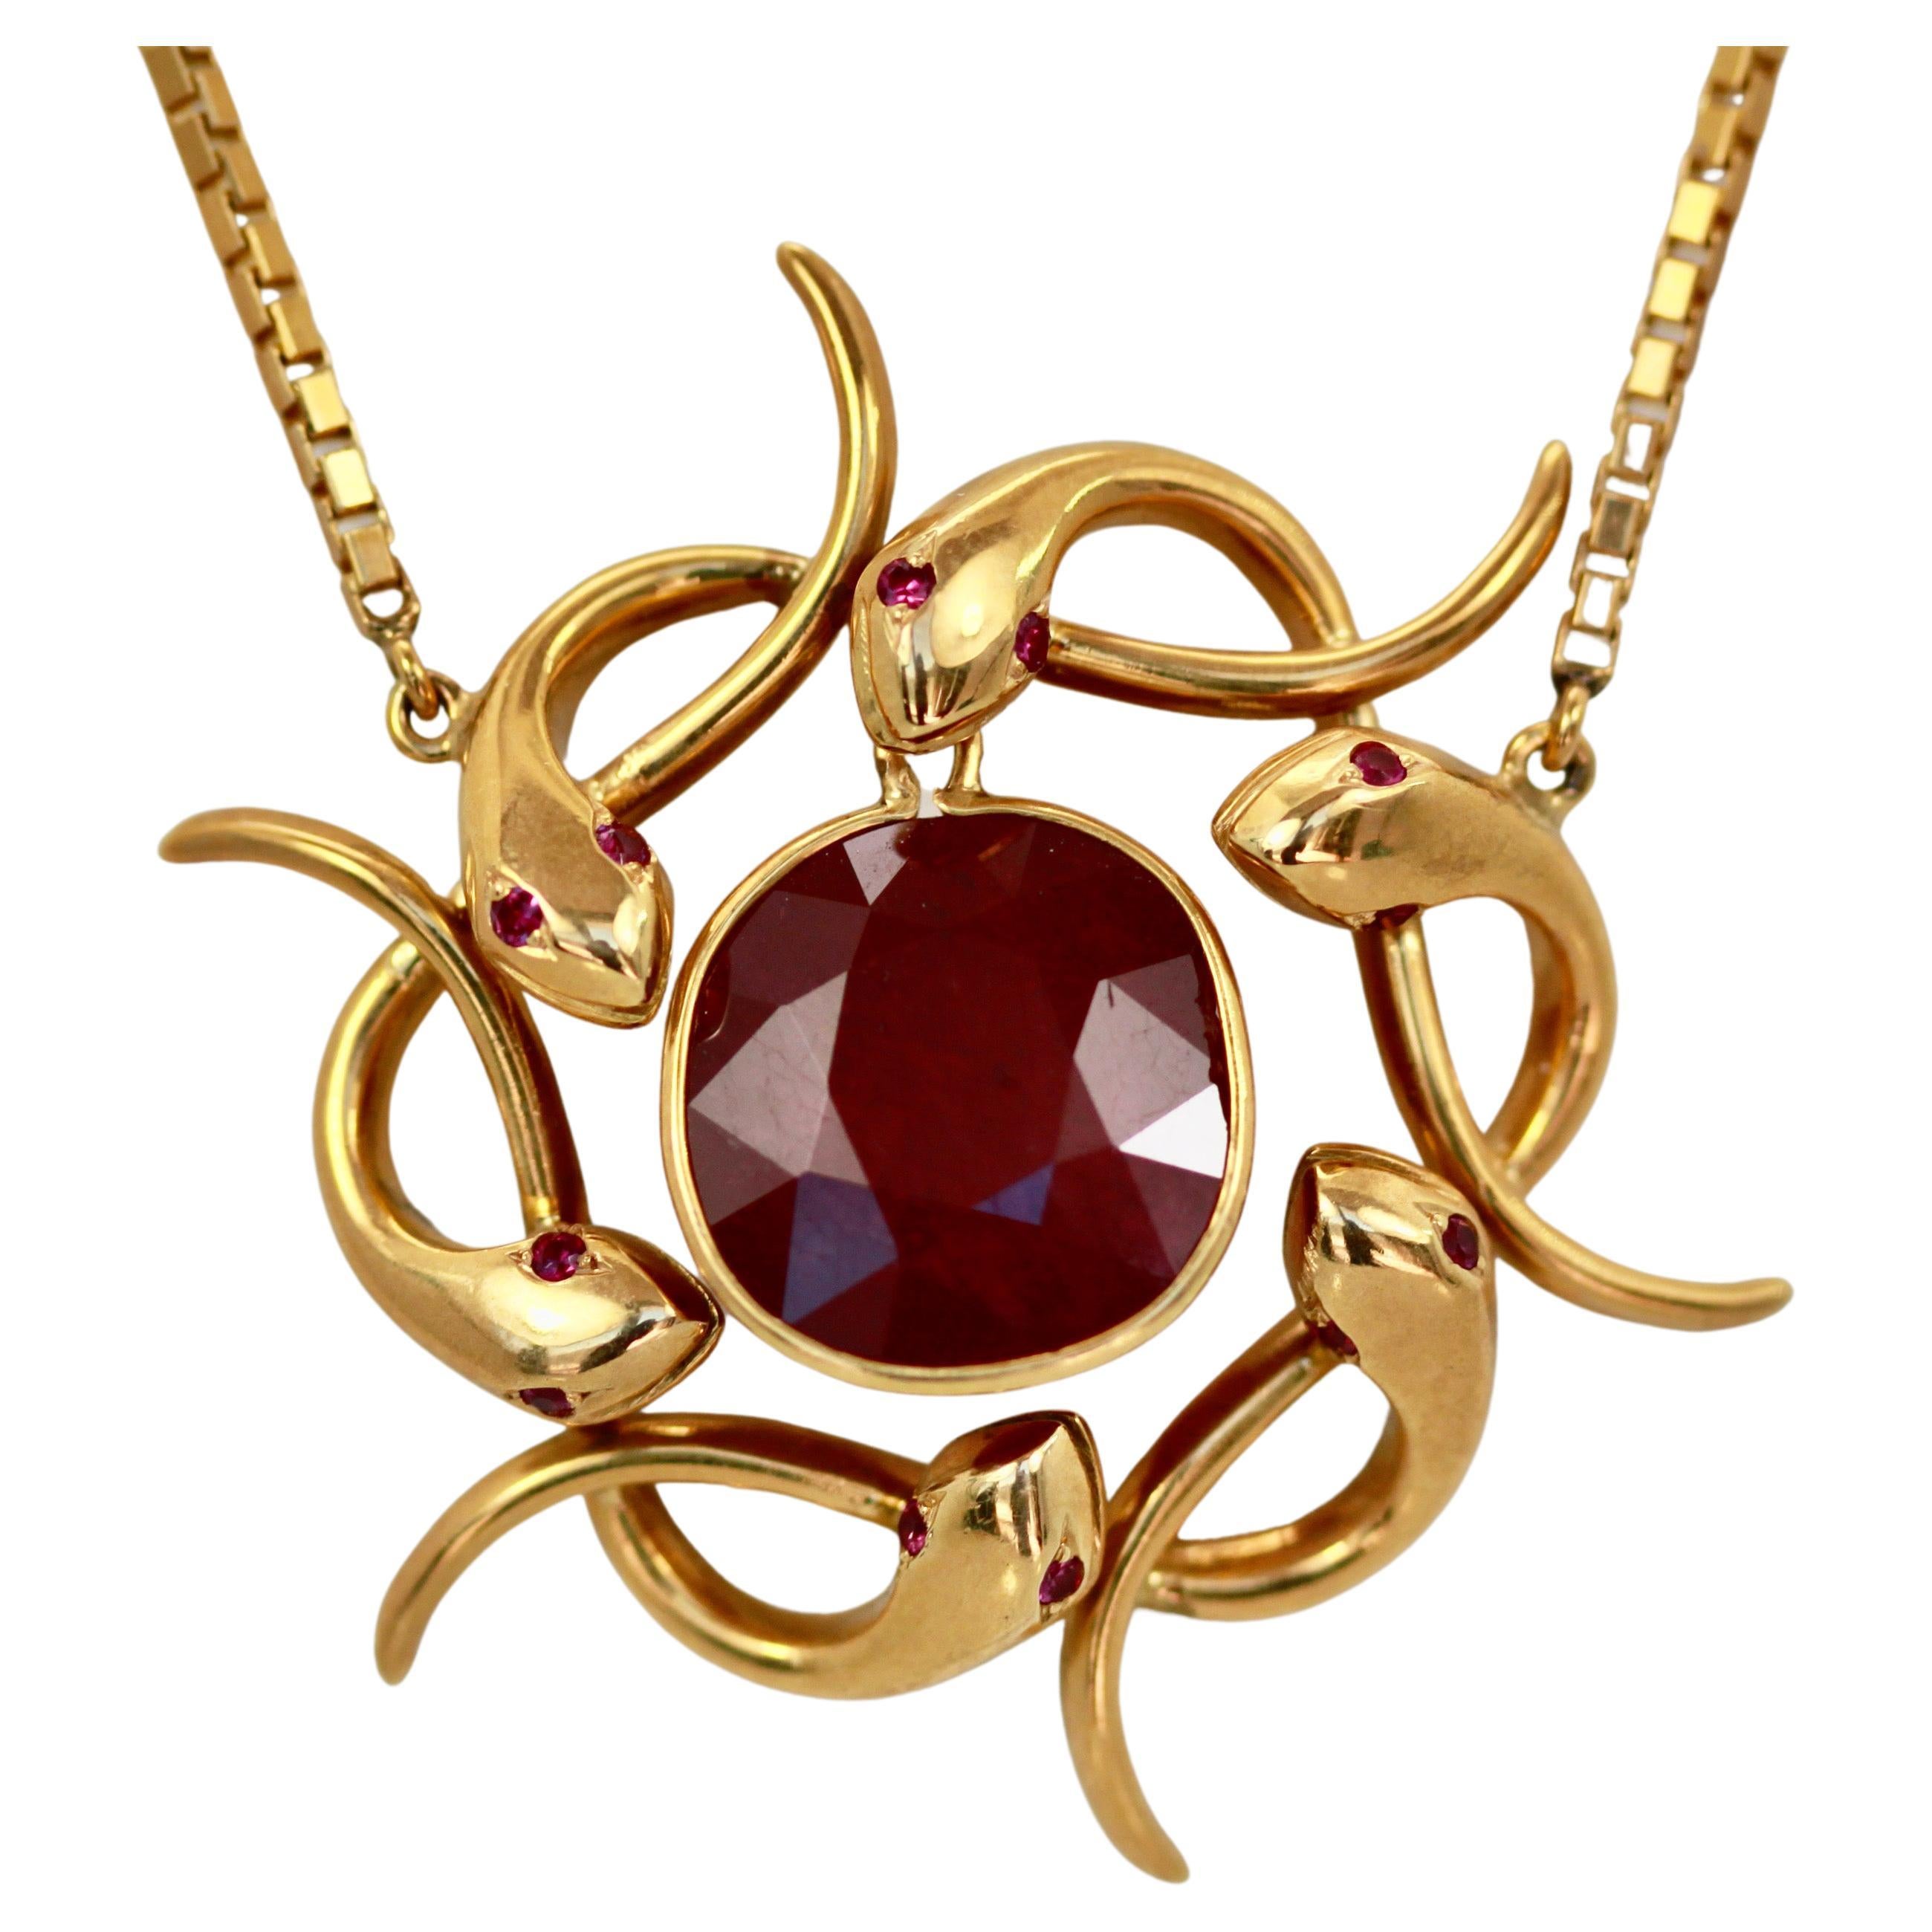 Retro Snake Pendant with 9 Carat Ruby in 14k & 22k Gold For Sale